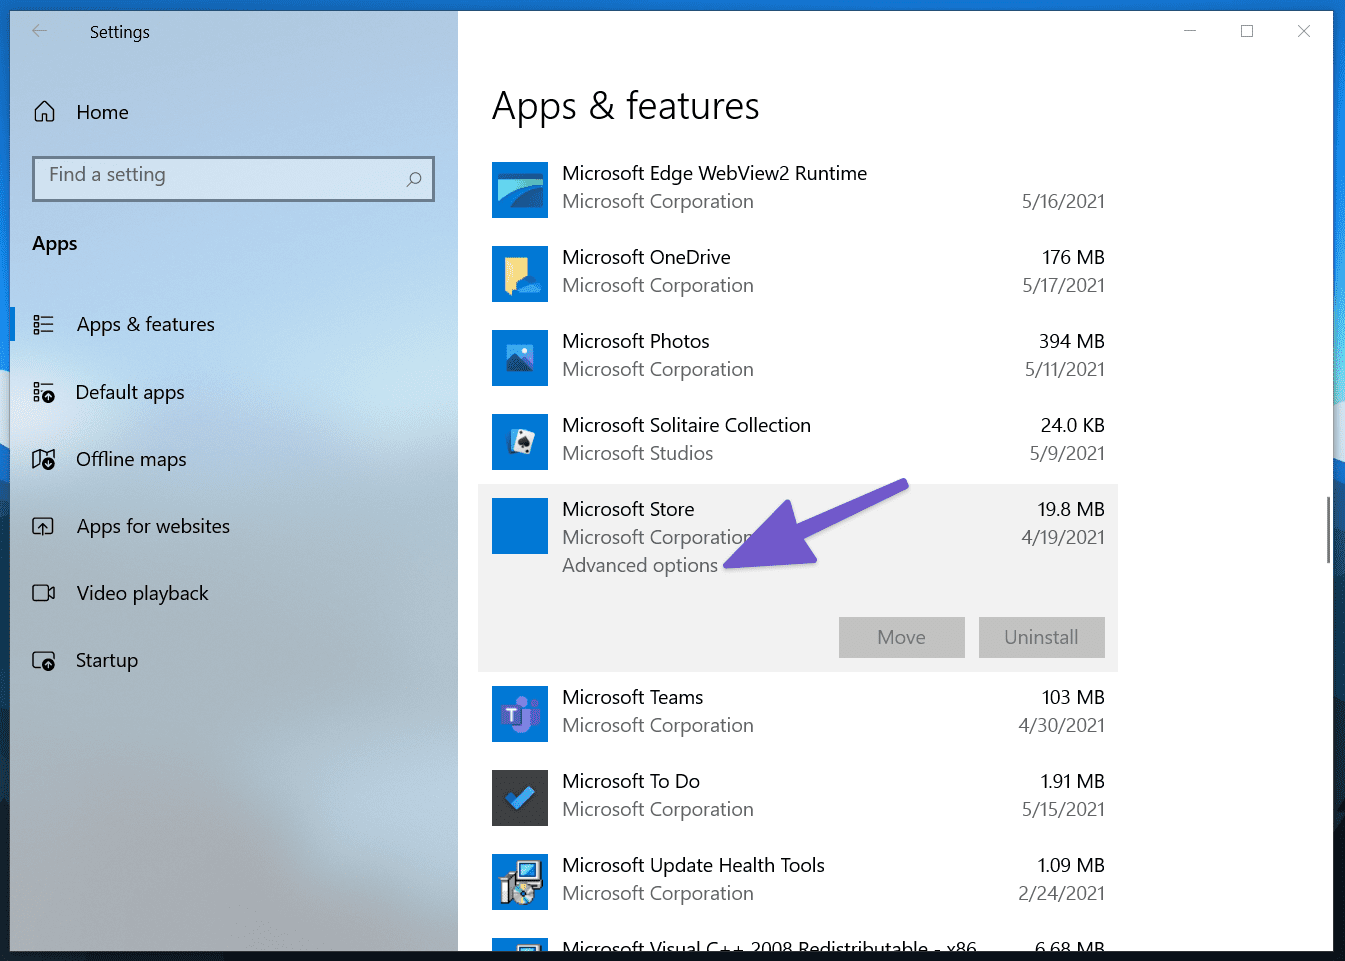 Advanced options in microsoft store